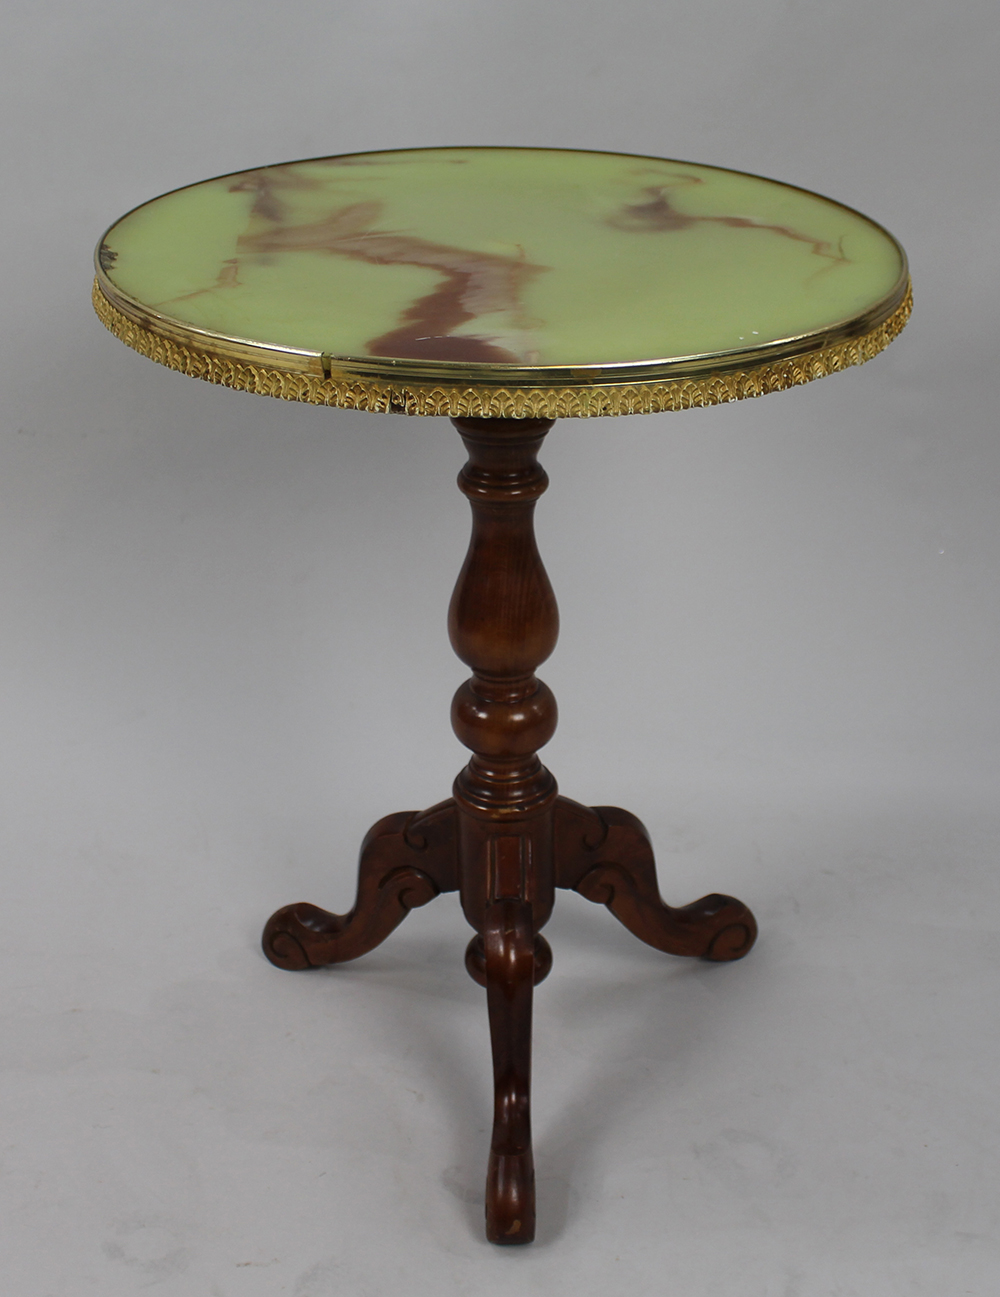 Vintage Tripod Table with Simulated Onyx Top - Image 3 of 4